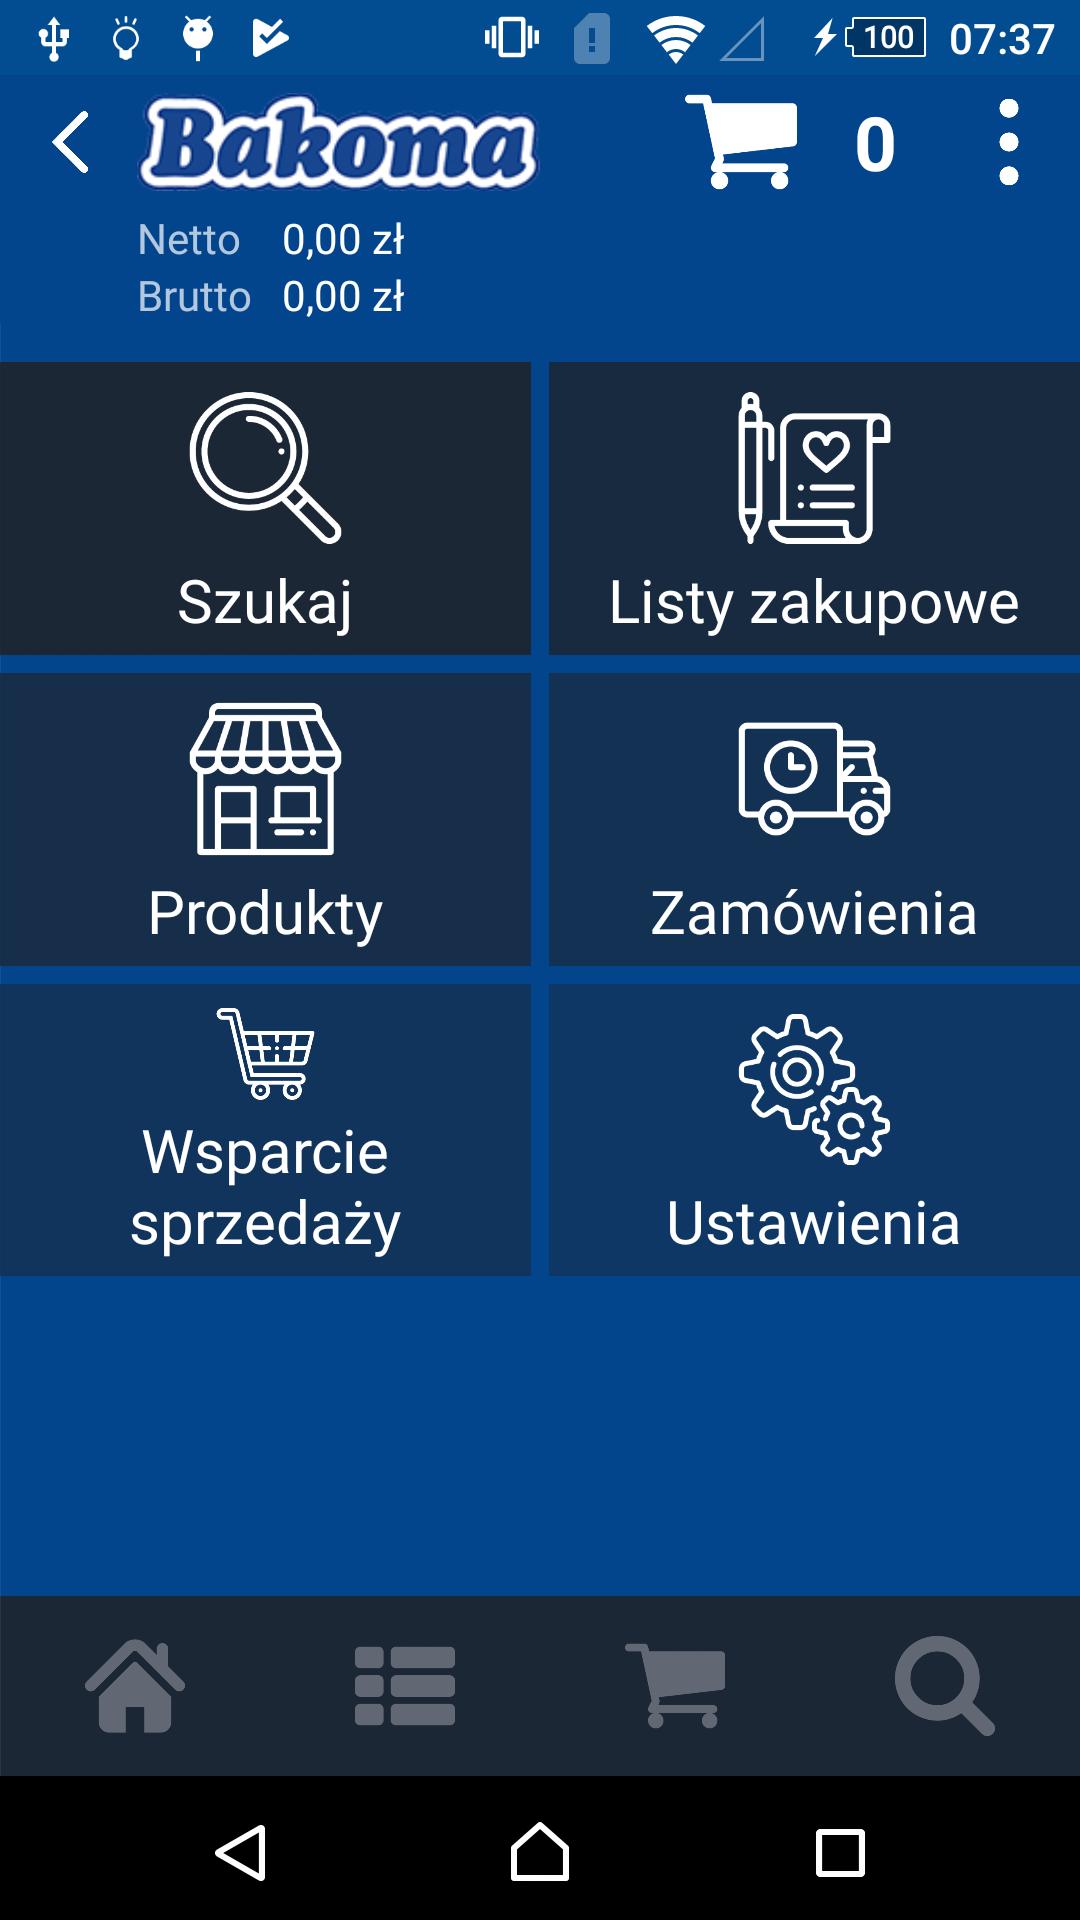 Bakoma B2B for Android - APK Download